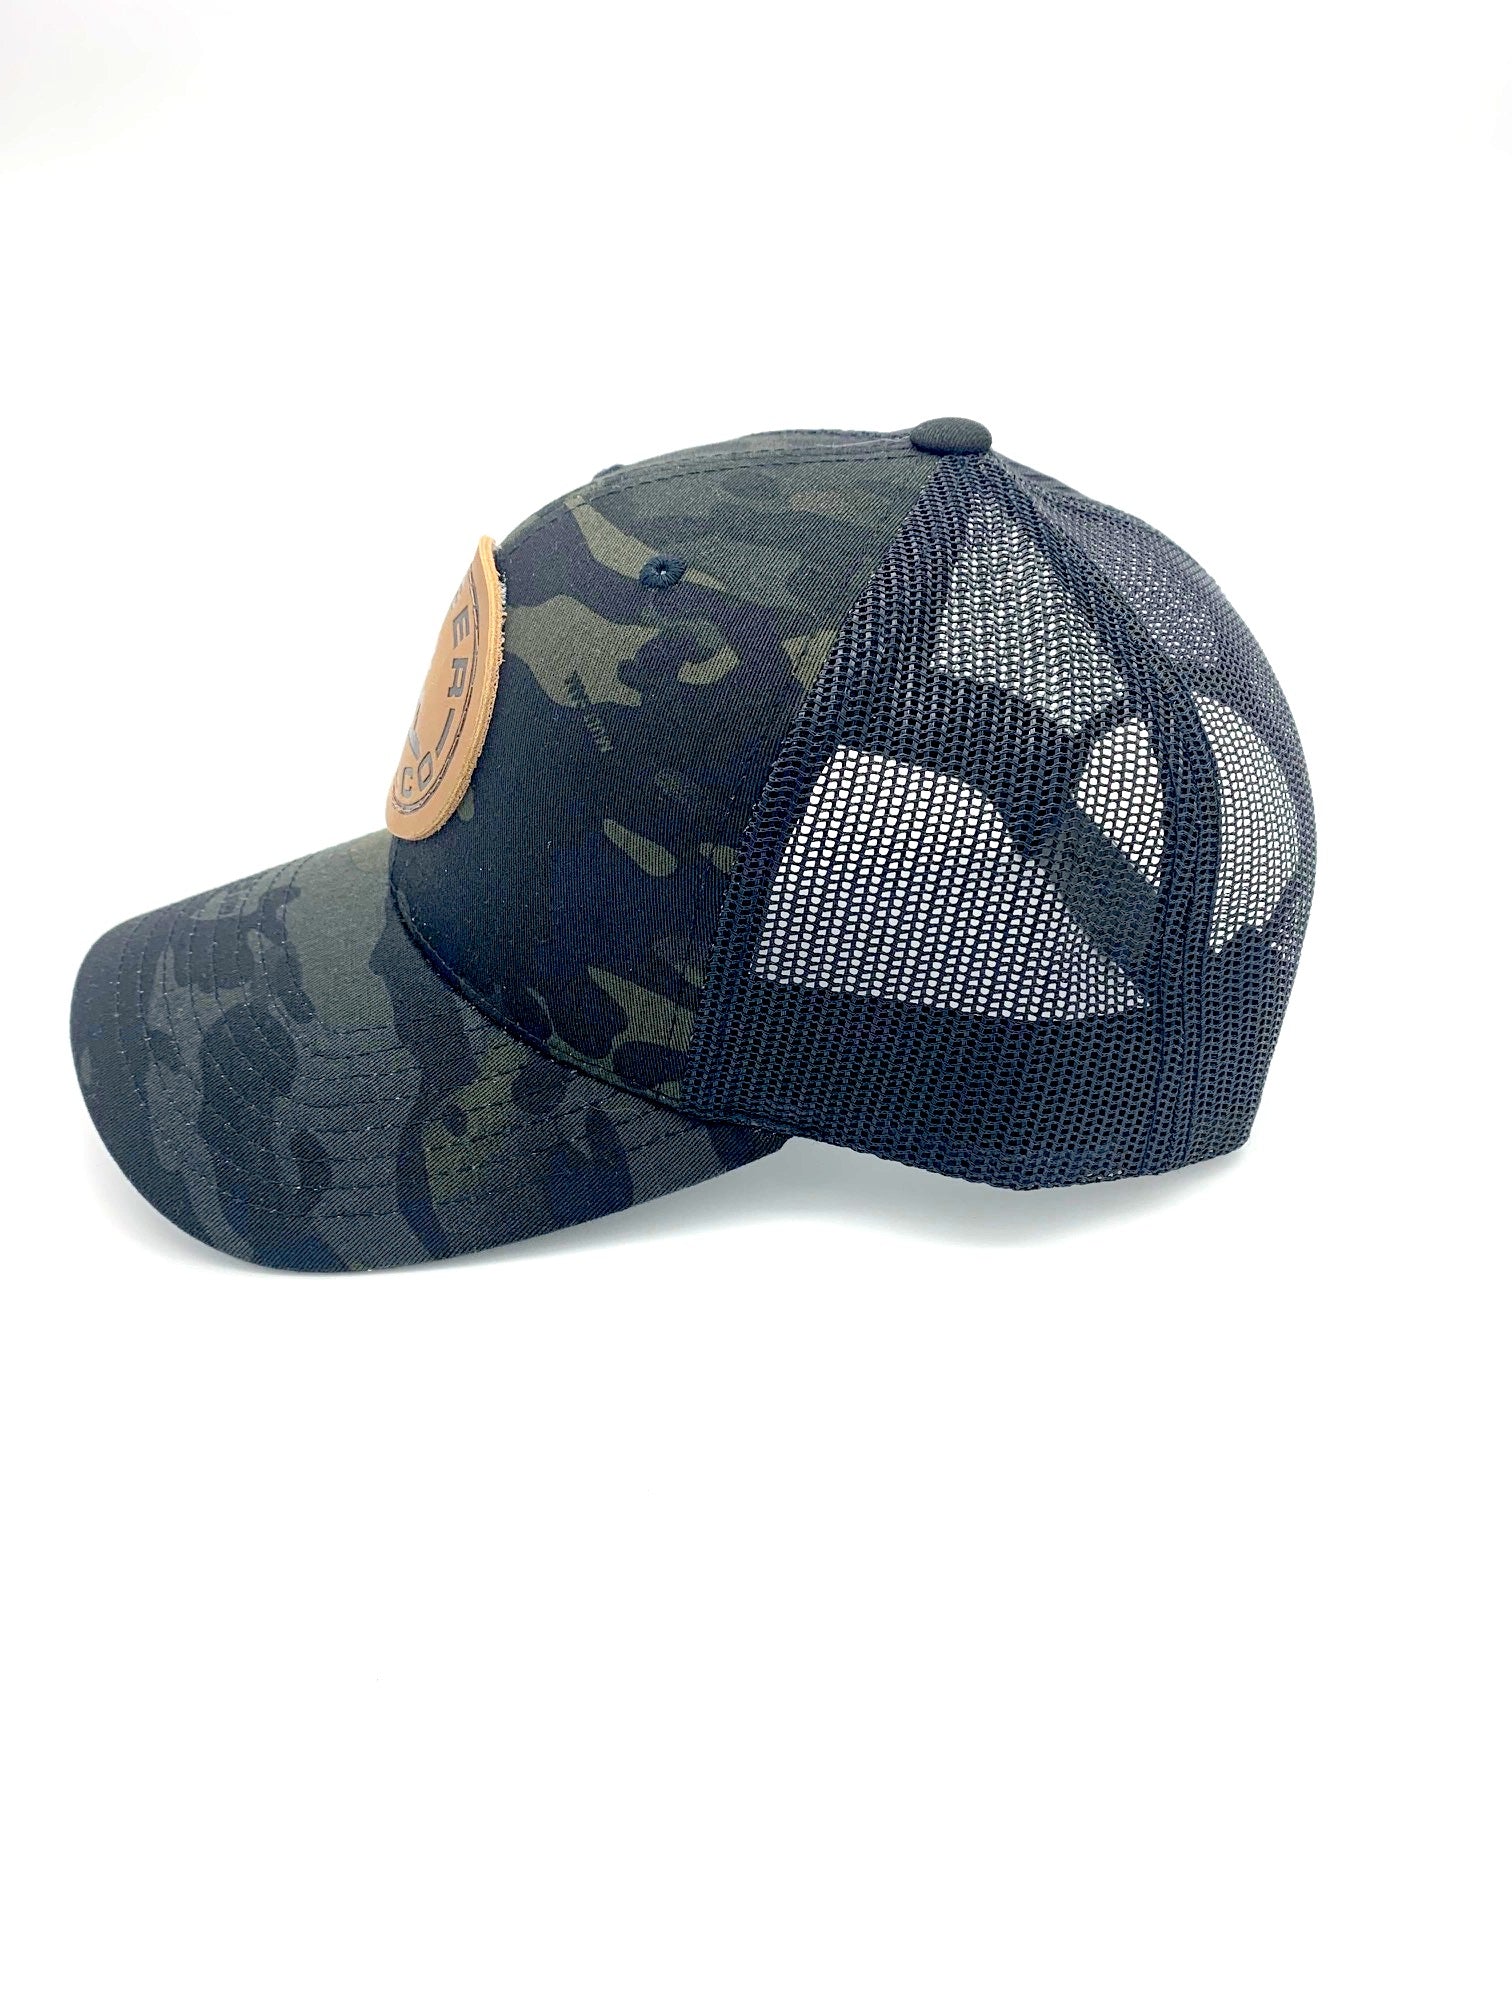 Camo Trucker Hat with Roger Wilco Patch